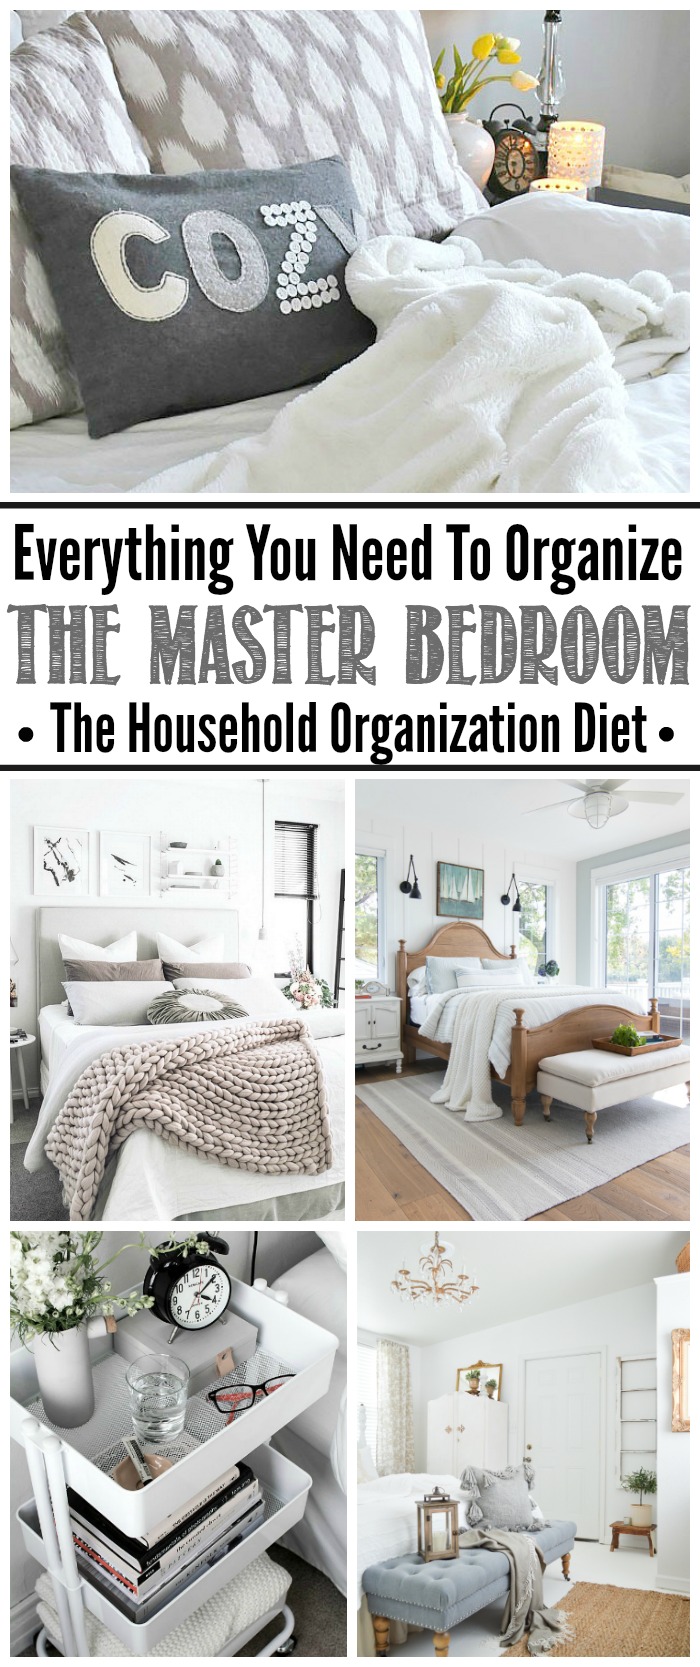 Master bedroom Ideas Organization. Tips, tricks and tutorials to create an organized and relaxing master bedroom retreat.